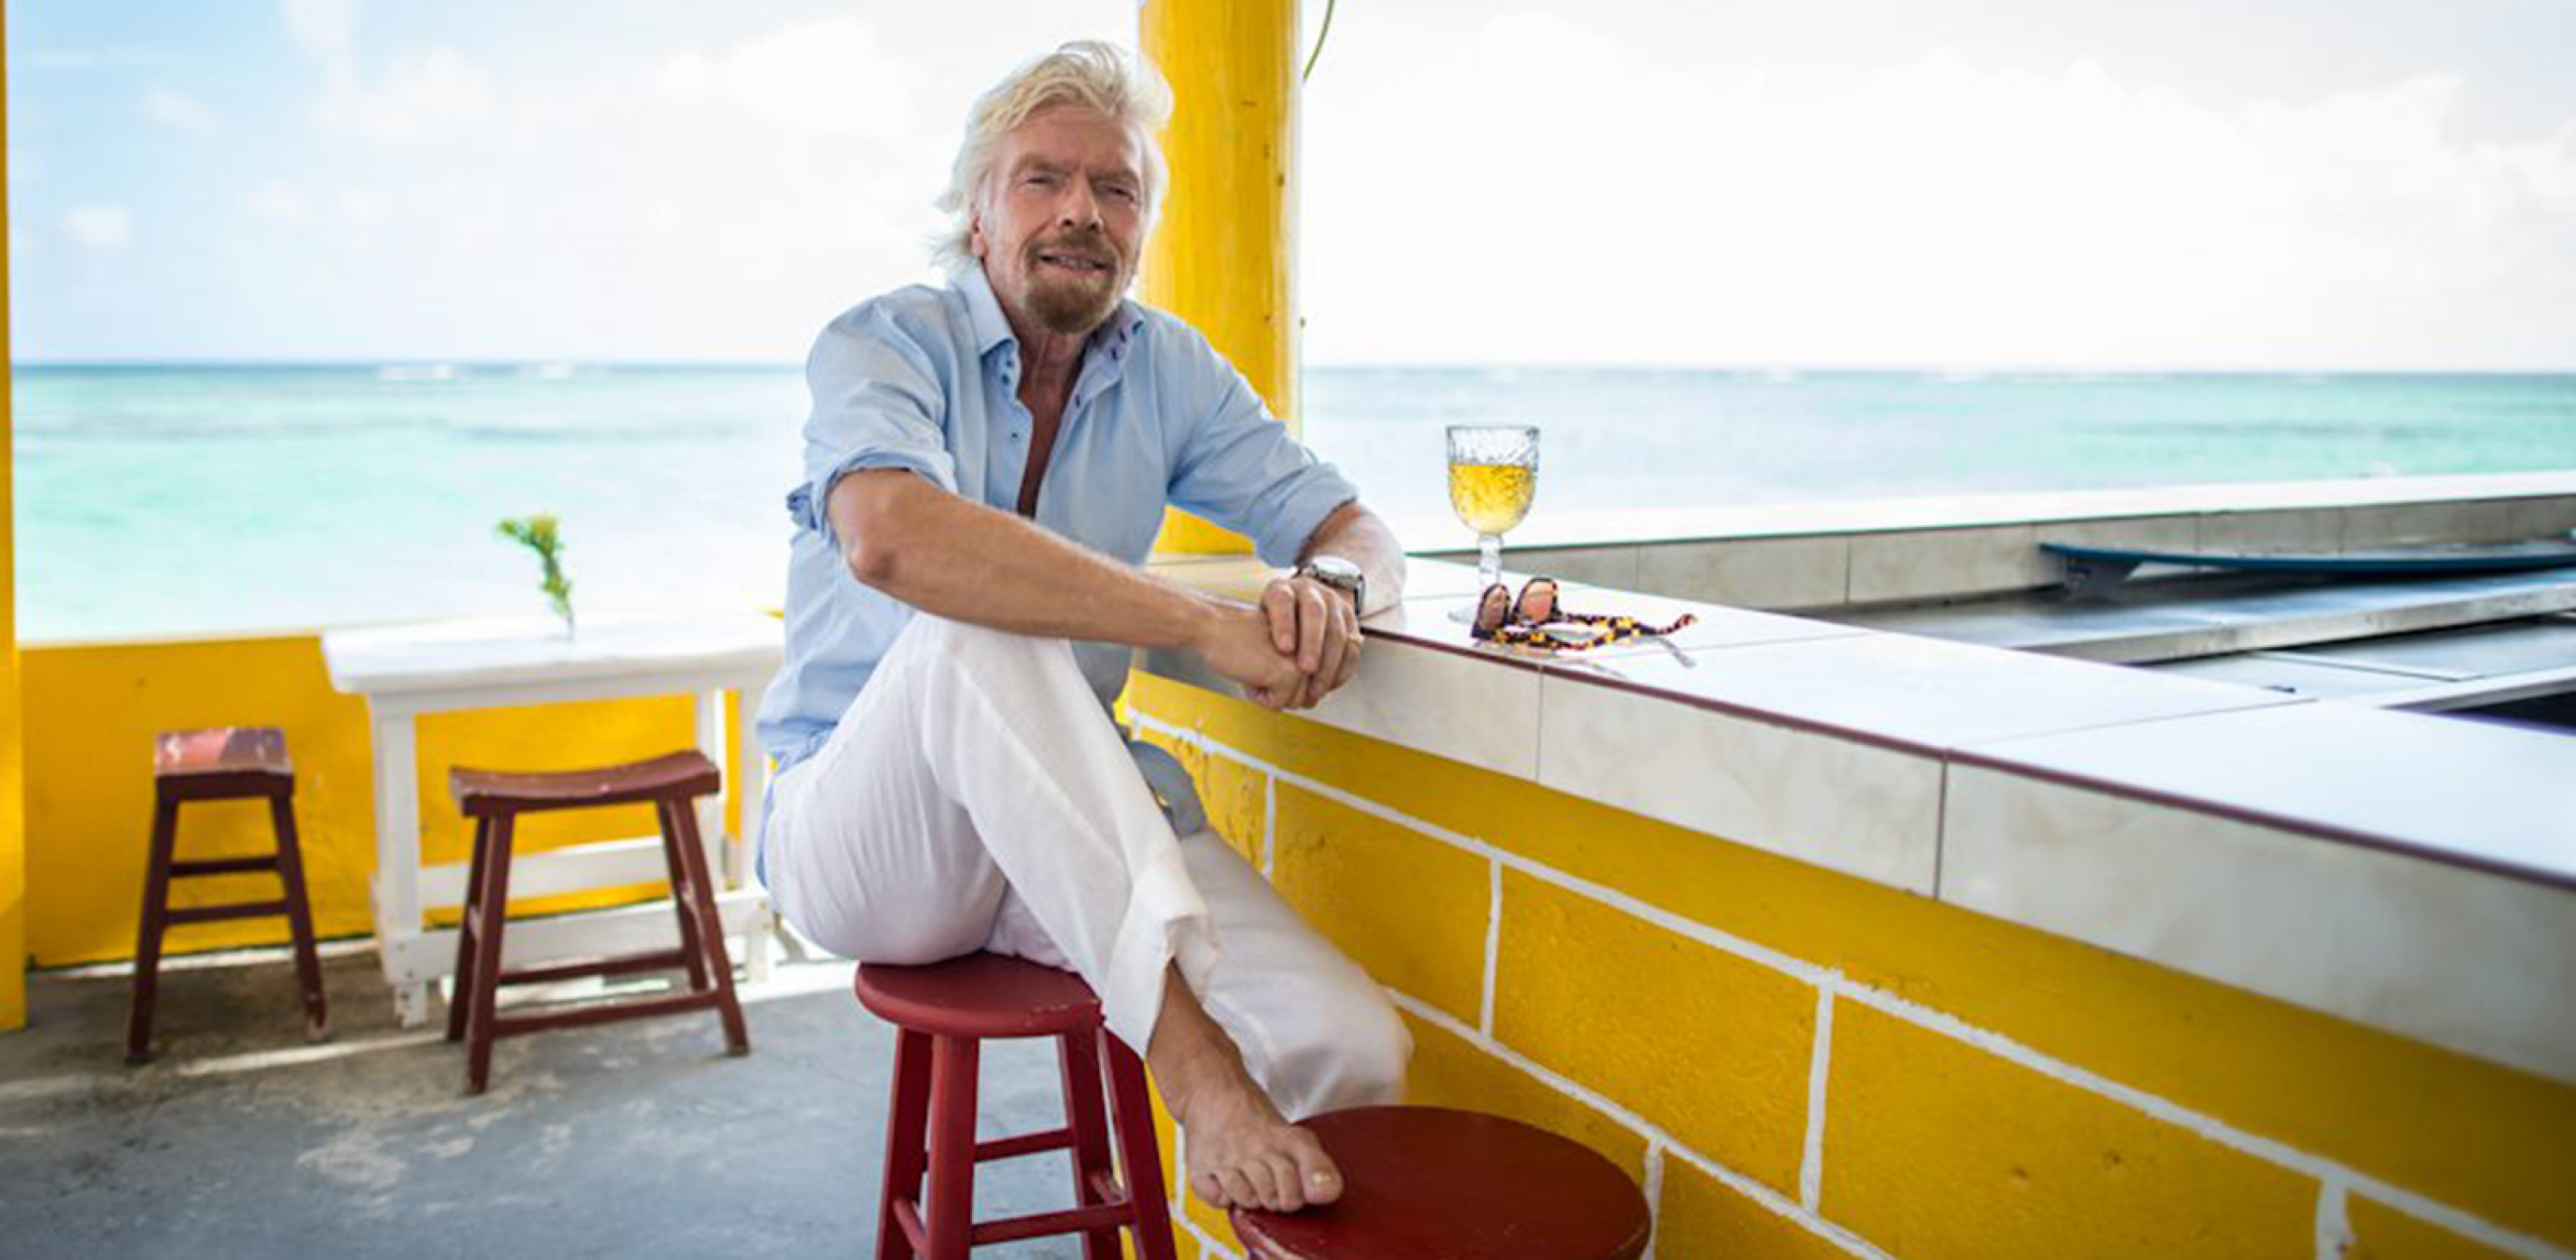 Richard Branson sitting at a counter with ocean in background